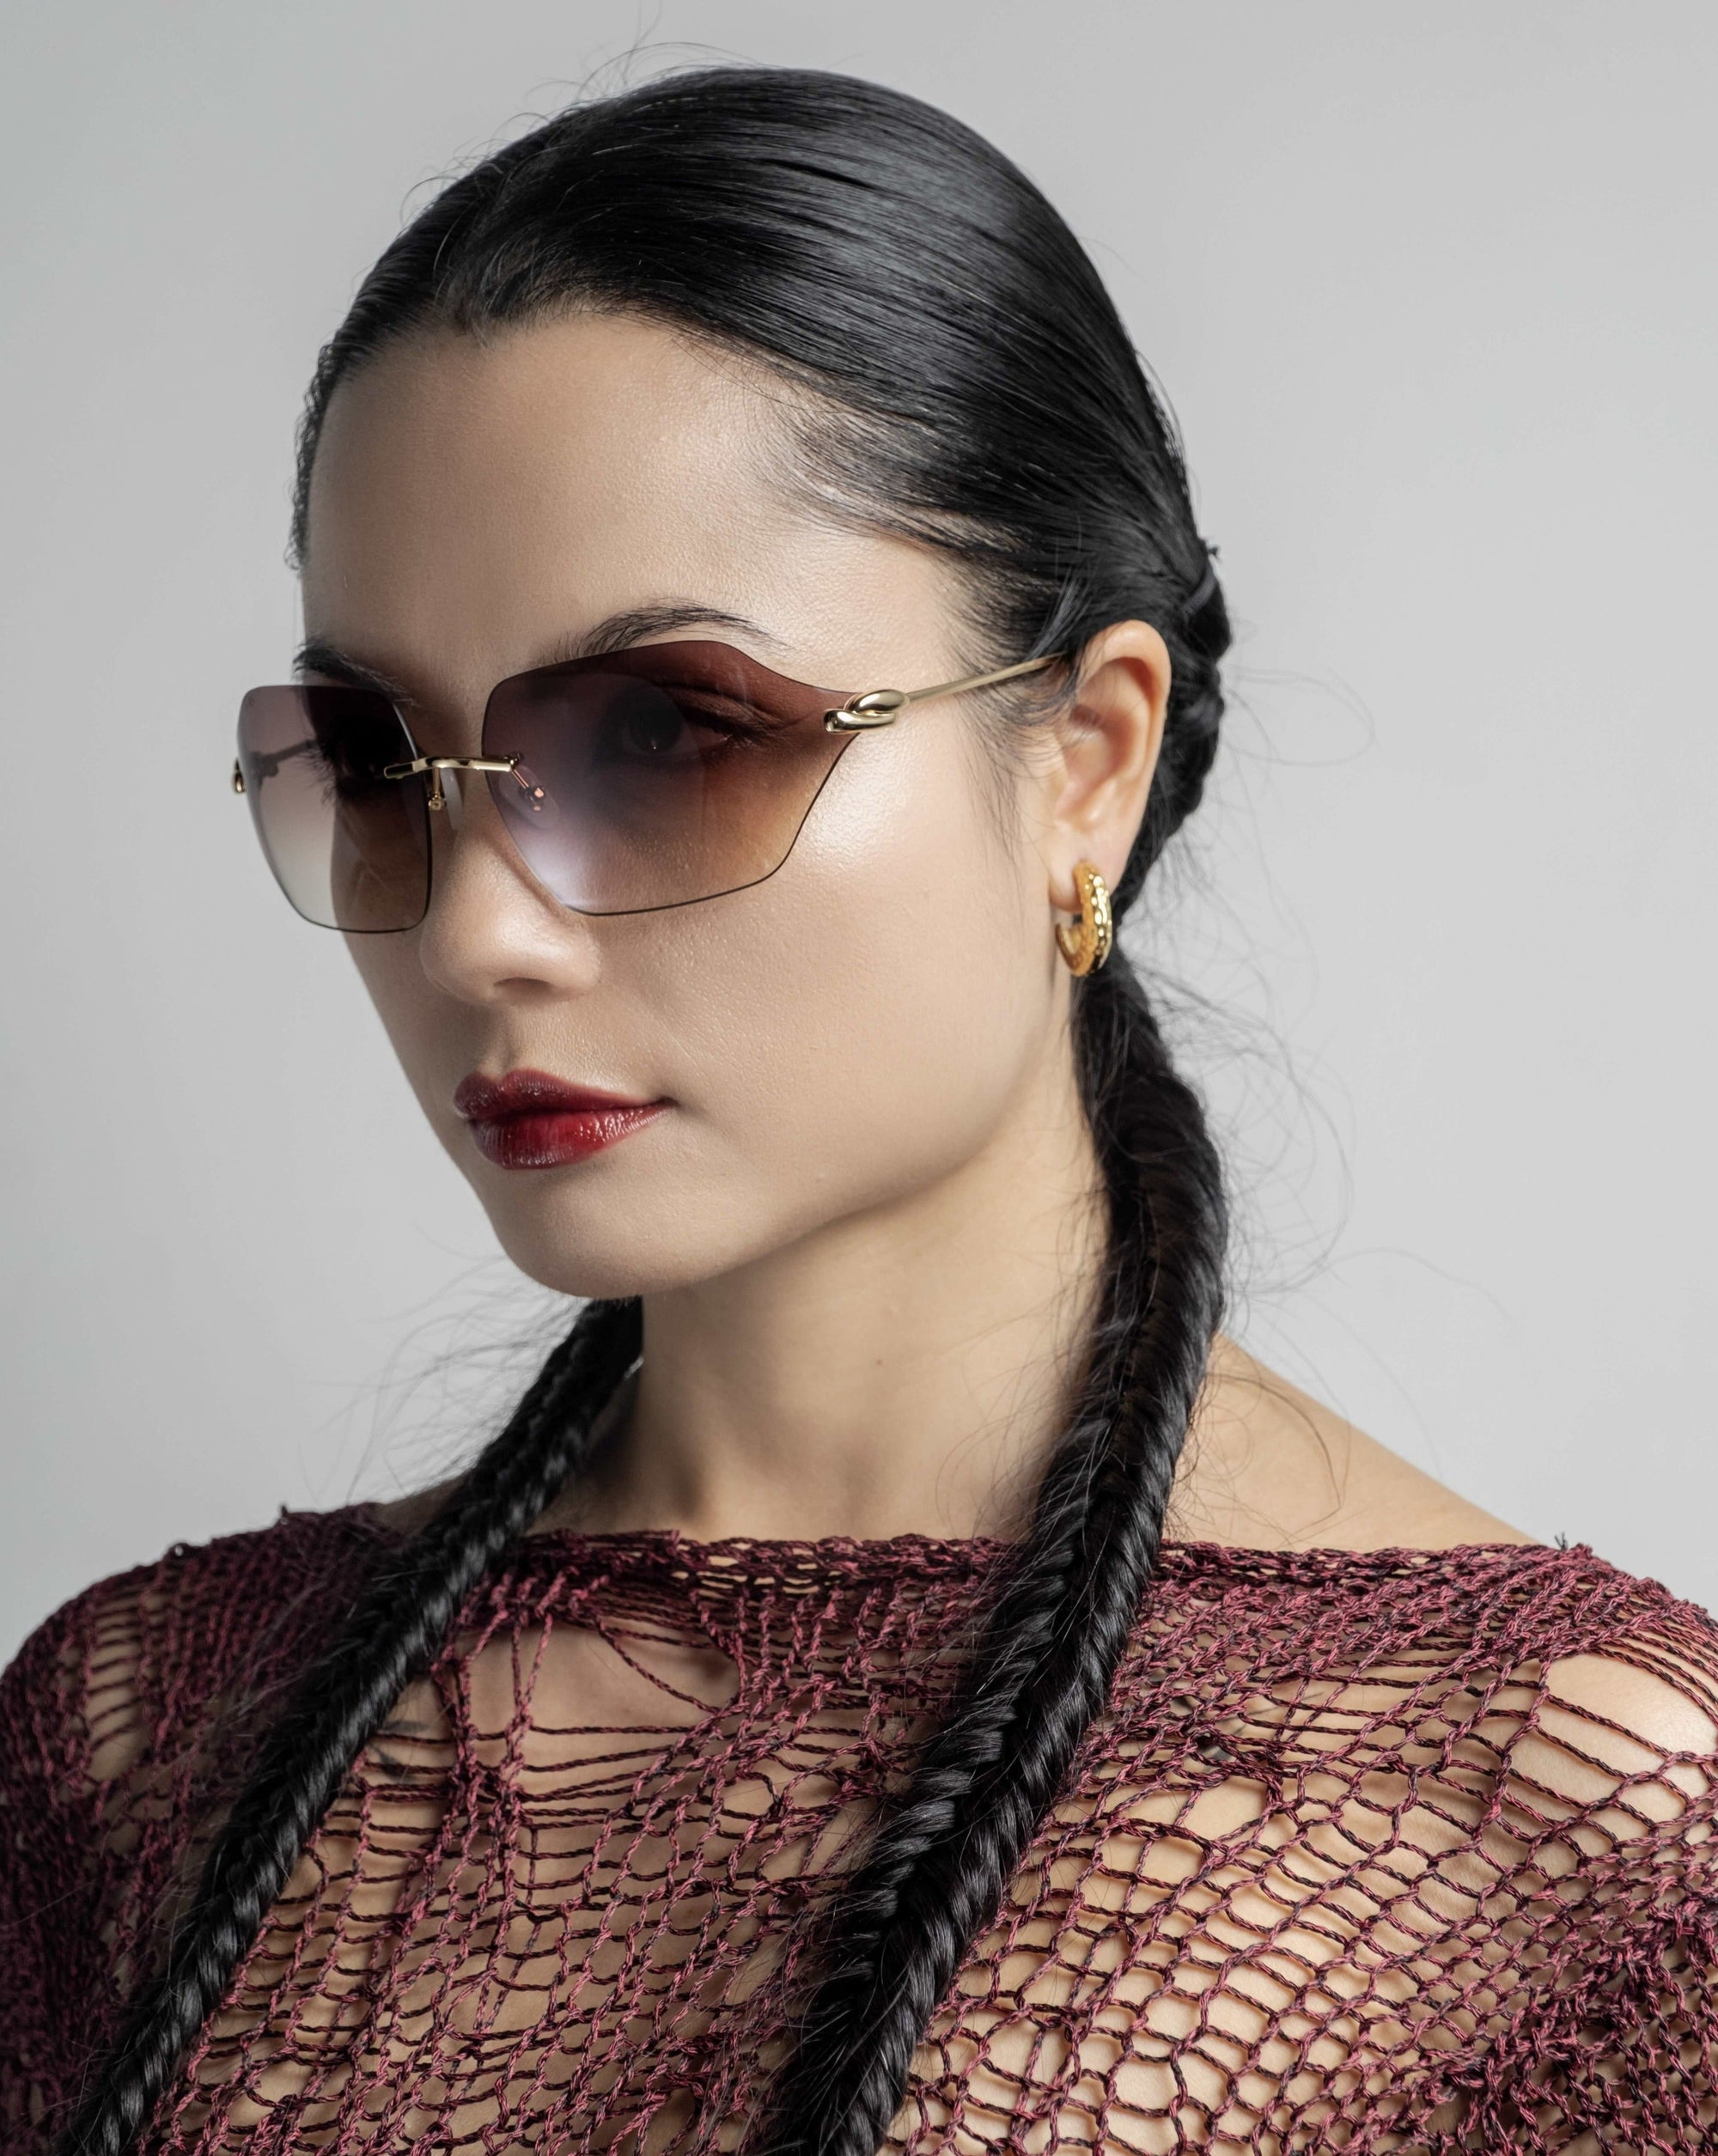 A woman with dark hair styled in two long braids wears For Art&#39;s Sake® Serpent II sunglasses, golden hoop earrings, and a burgundy crochet top. She has a neutral facial expression and is set against a plain, light gray background.